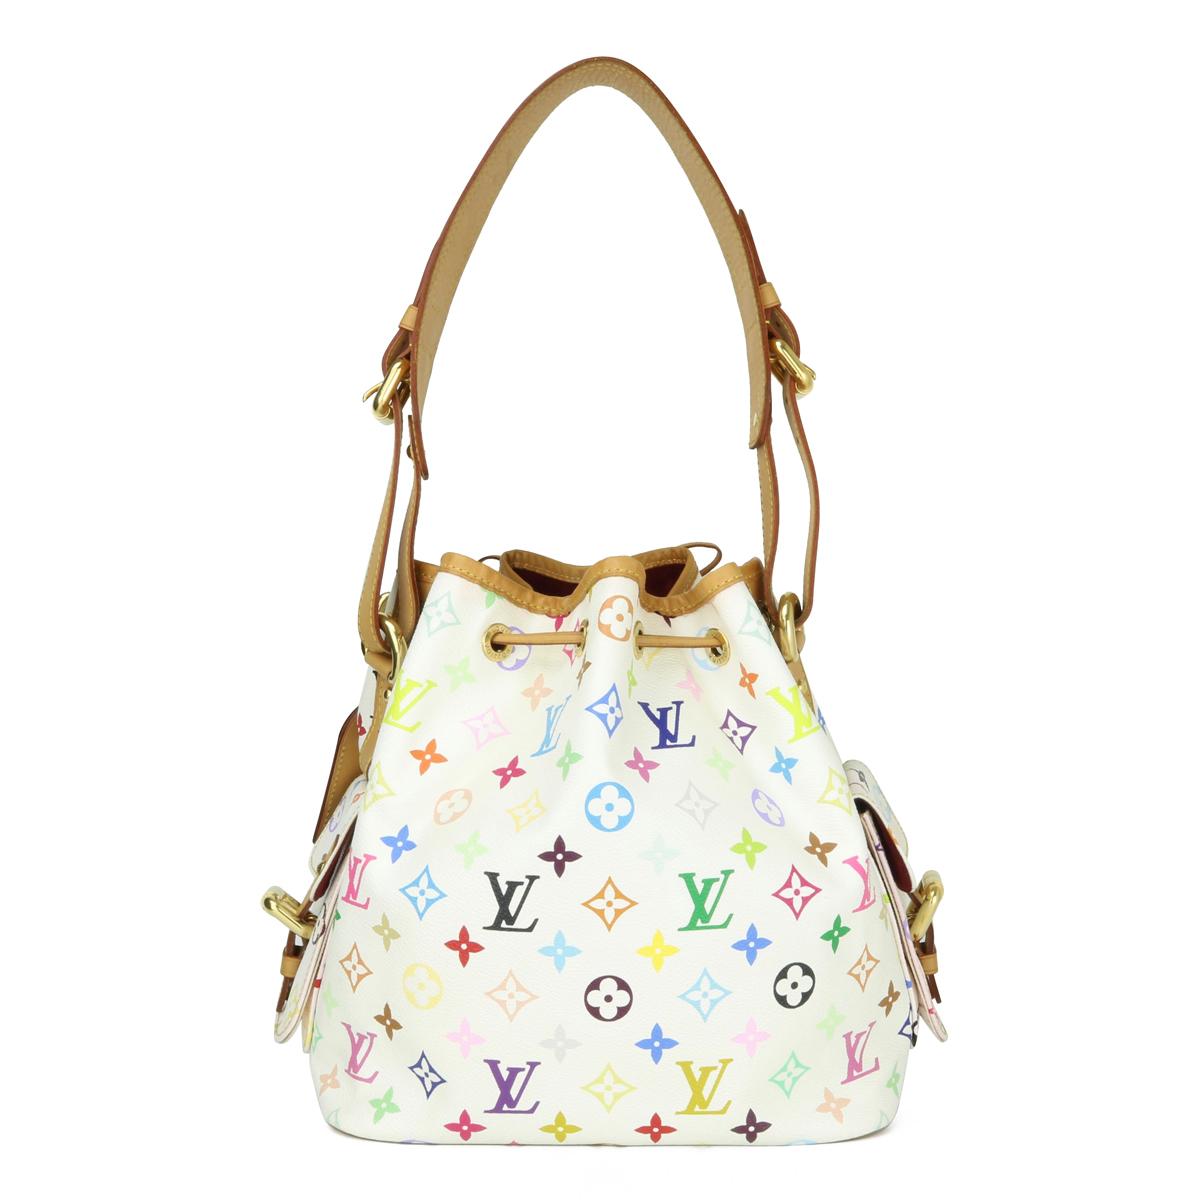 Louis Vuitton Petit Noé Bucket Bag in White Multicolore Monogram 2009.

This bag is in very good condition. It becomes more difficult to source one in this good condition since the Monogram Multicolor line was discontinued in 2015. 

- Exterior